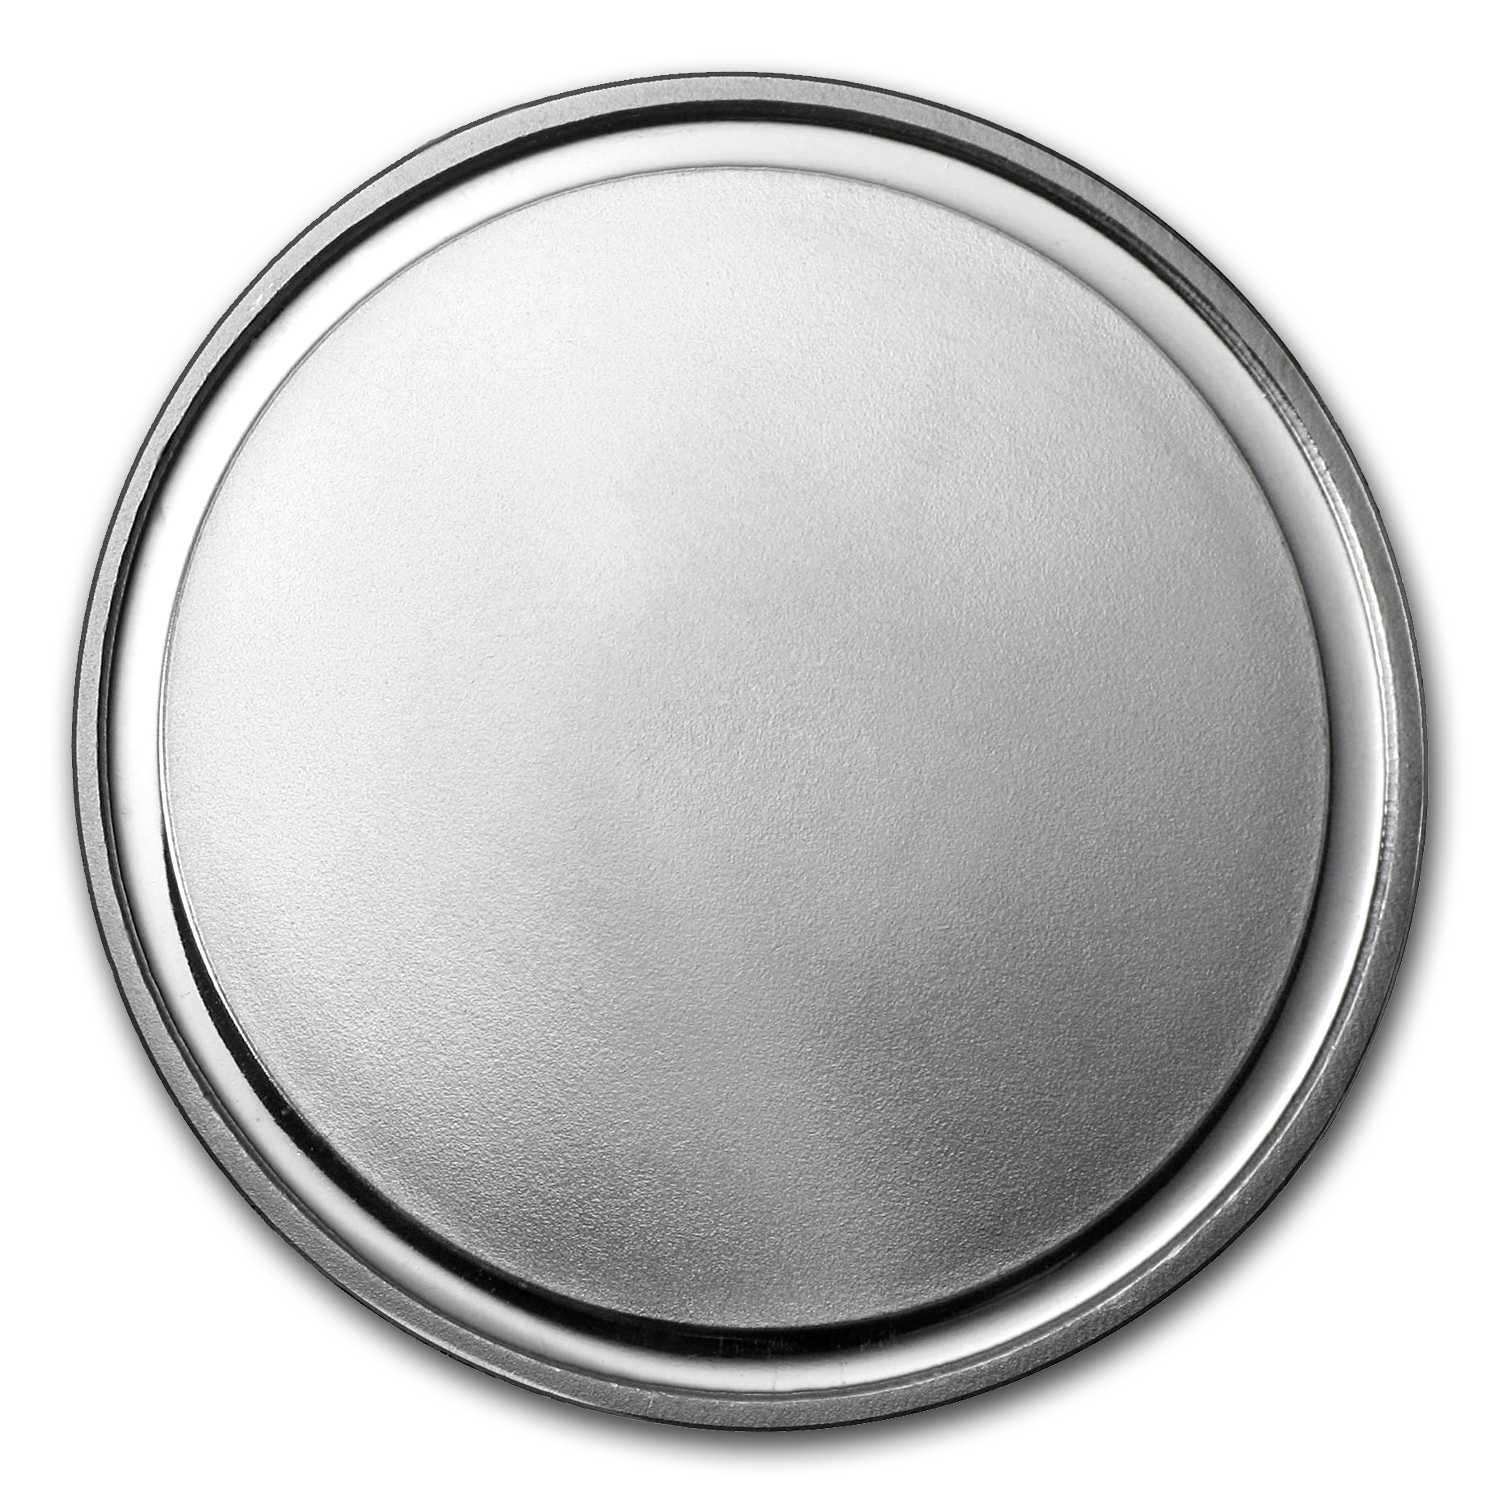 Blank Coin PNG Transparent Blank Coin.PNG Images. PlusPNG